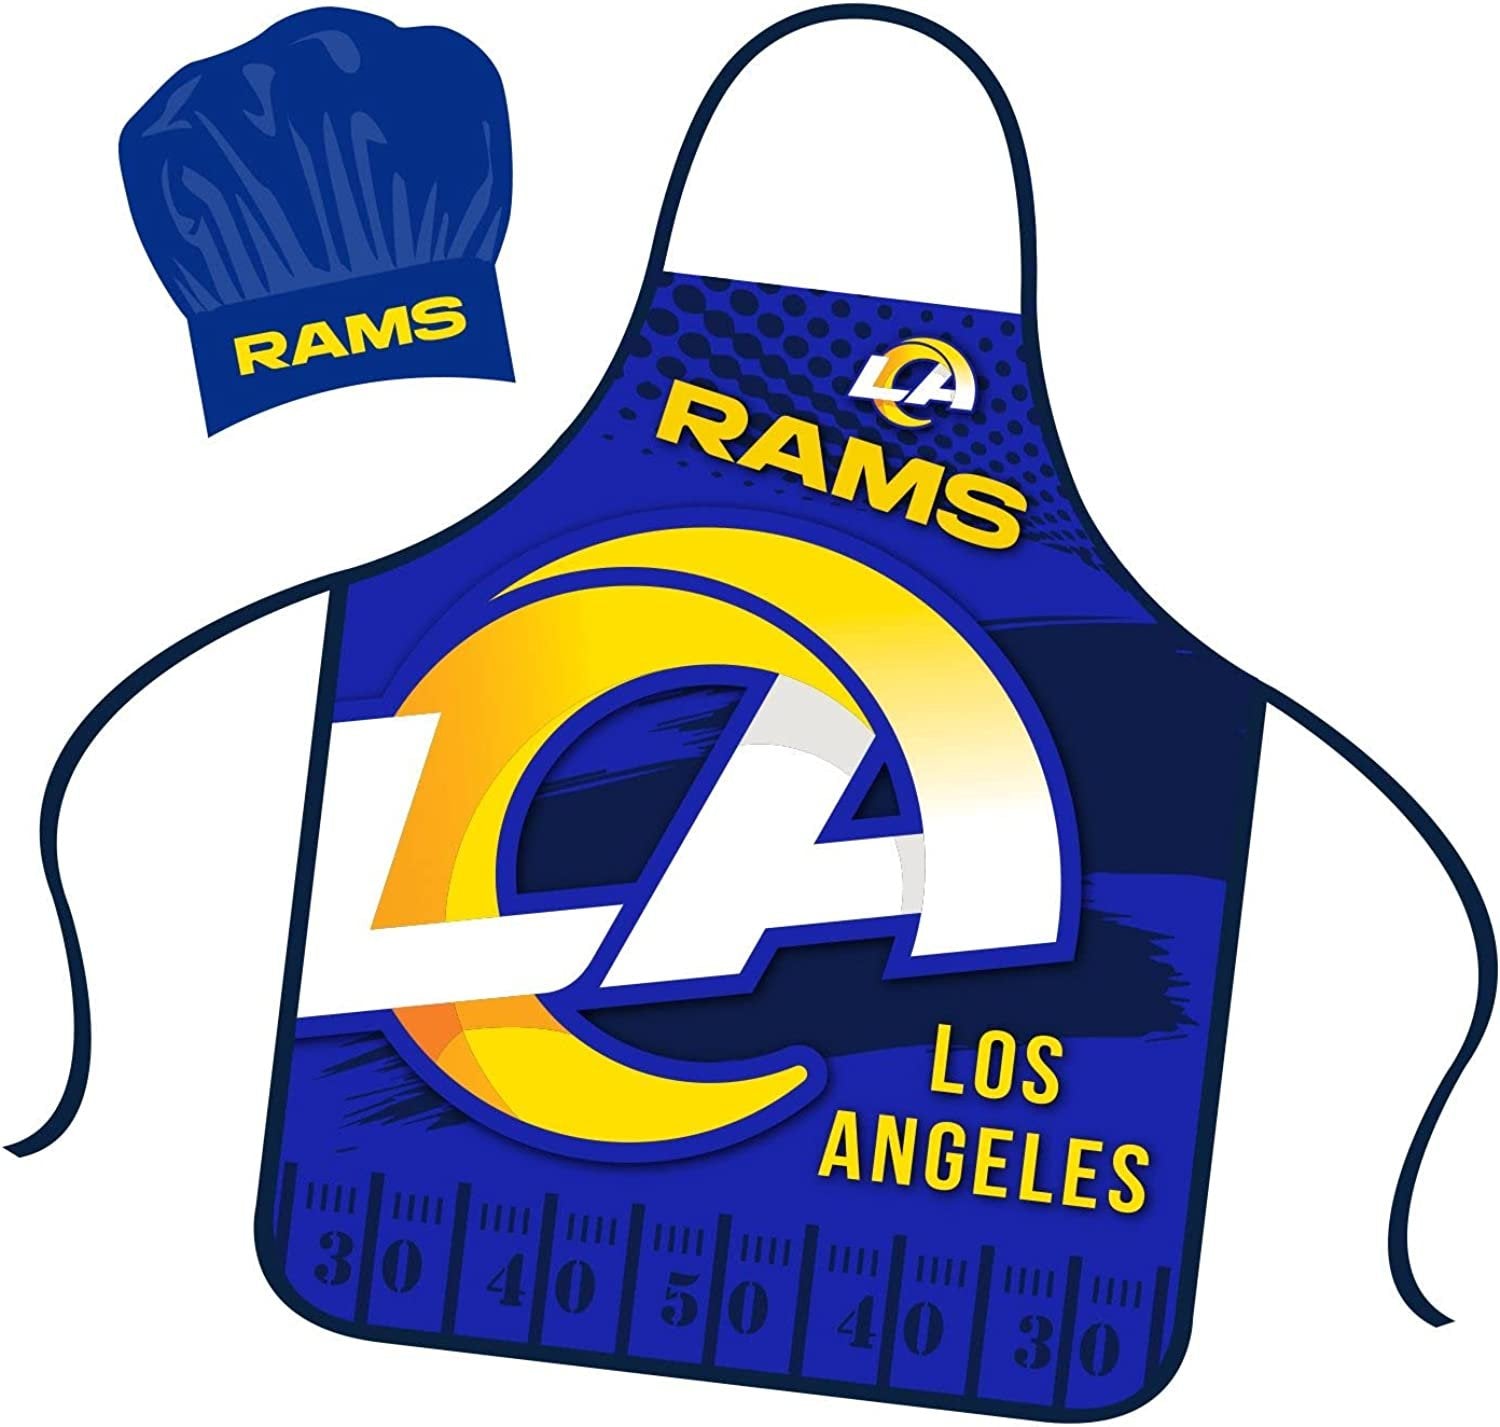 Los Angeles Rams Apron Chef Hat Set Full Color Universal Size Tie Back Grilling Tailgate BBQ Cooking Host